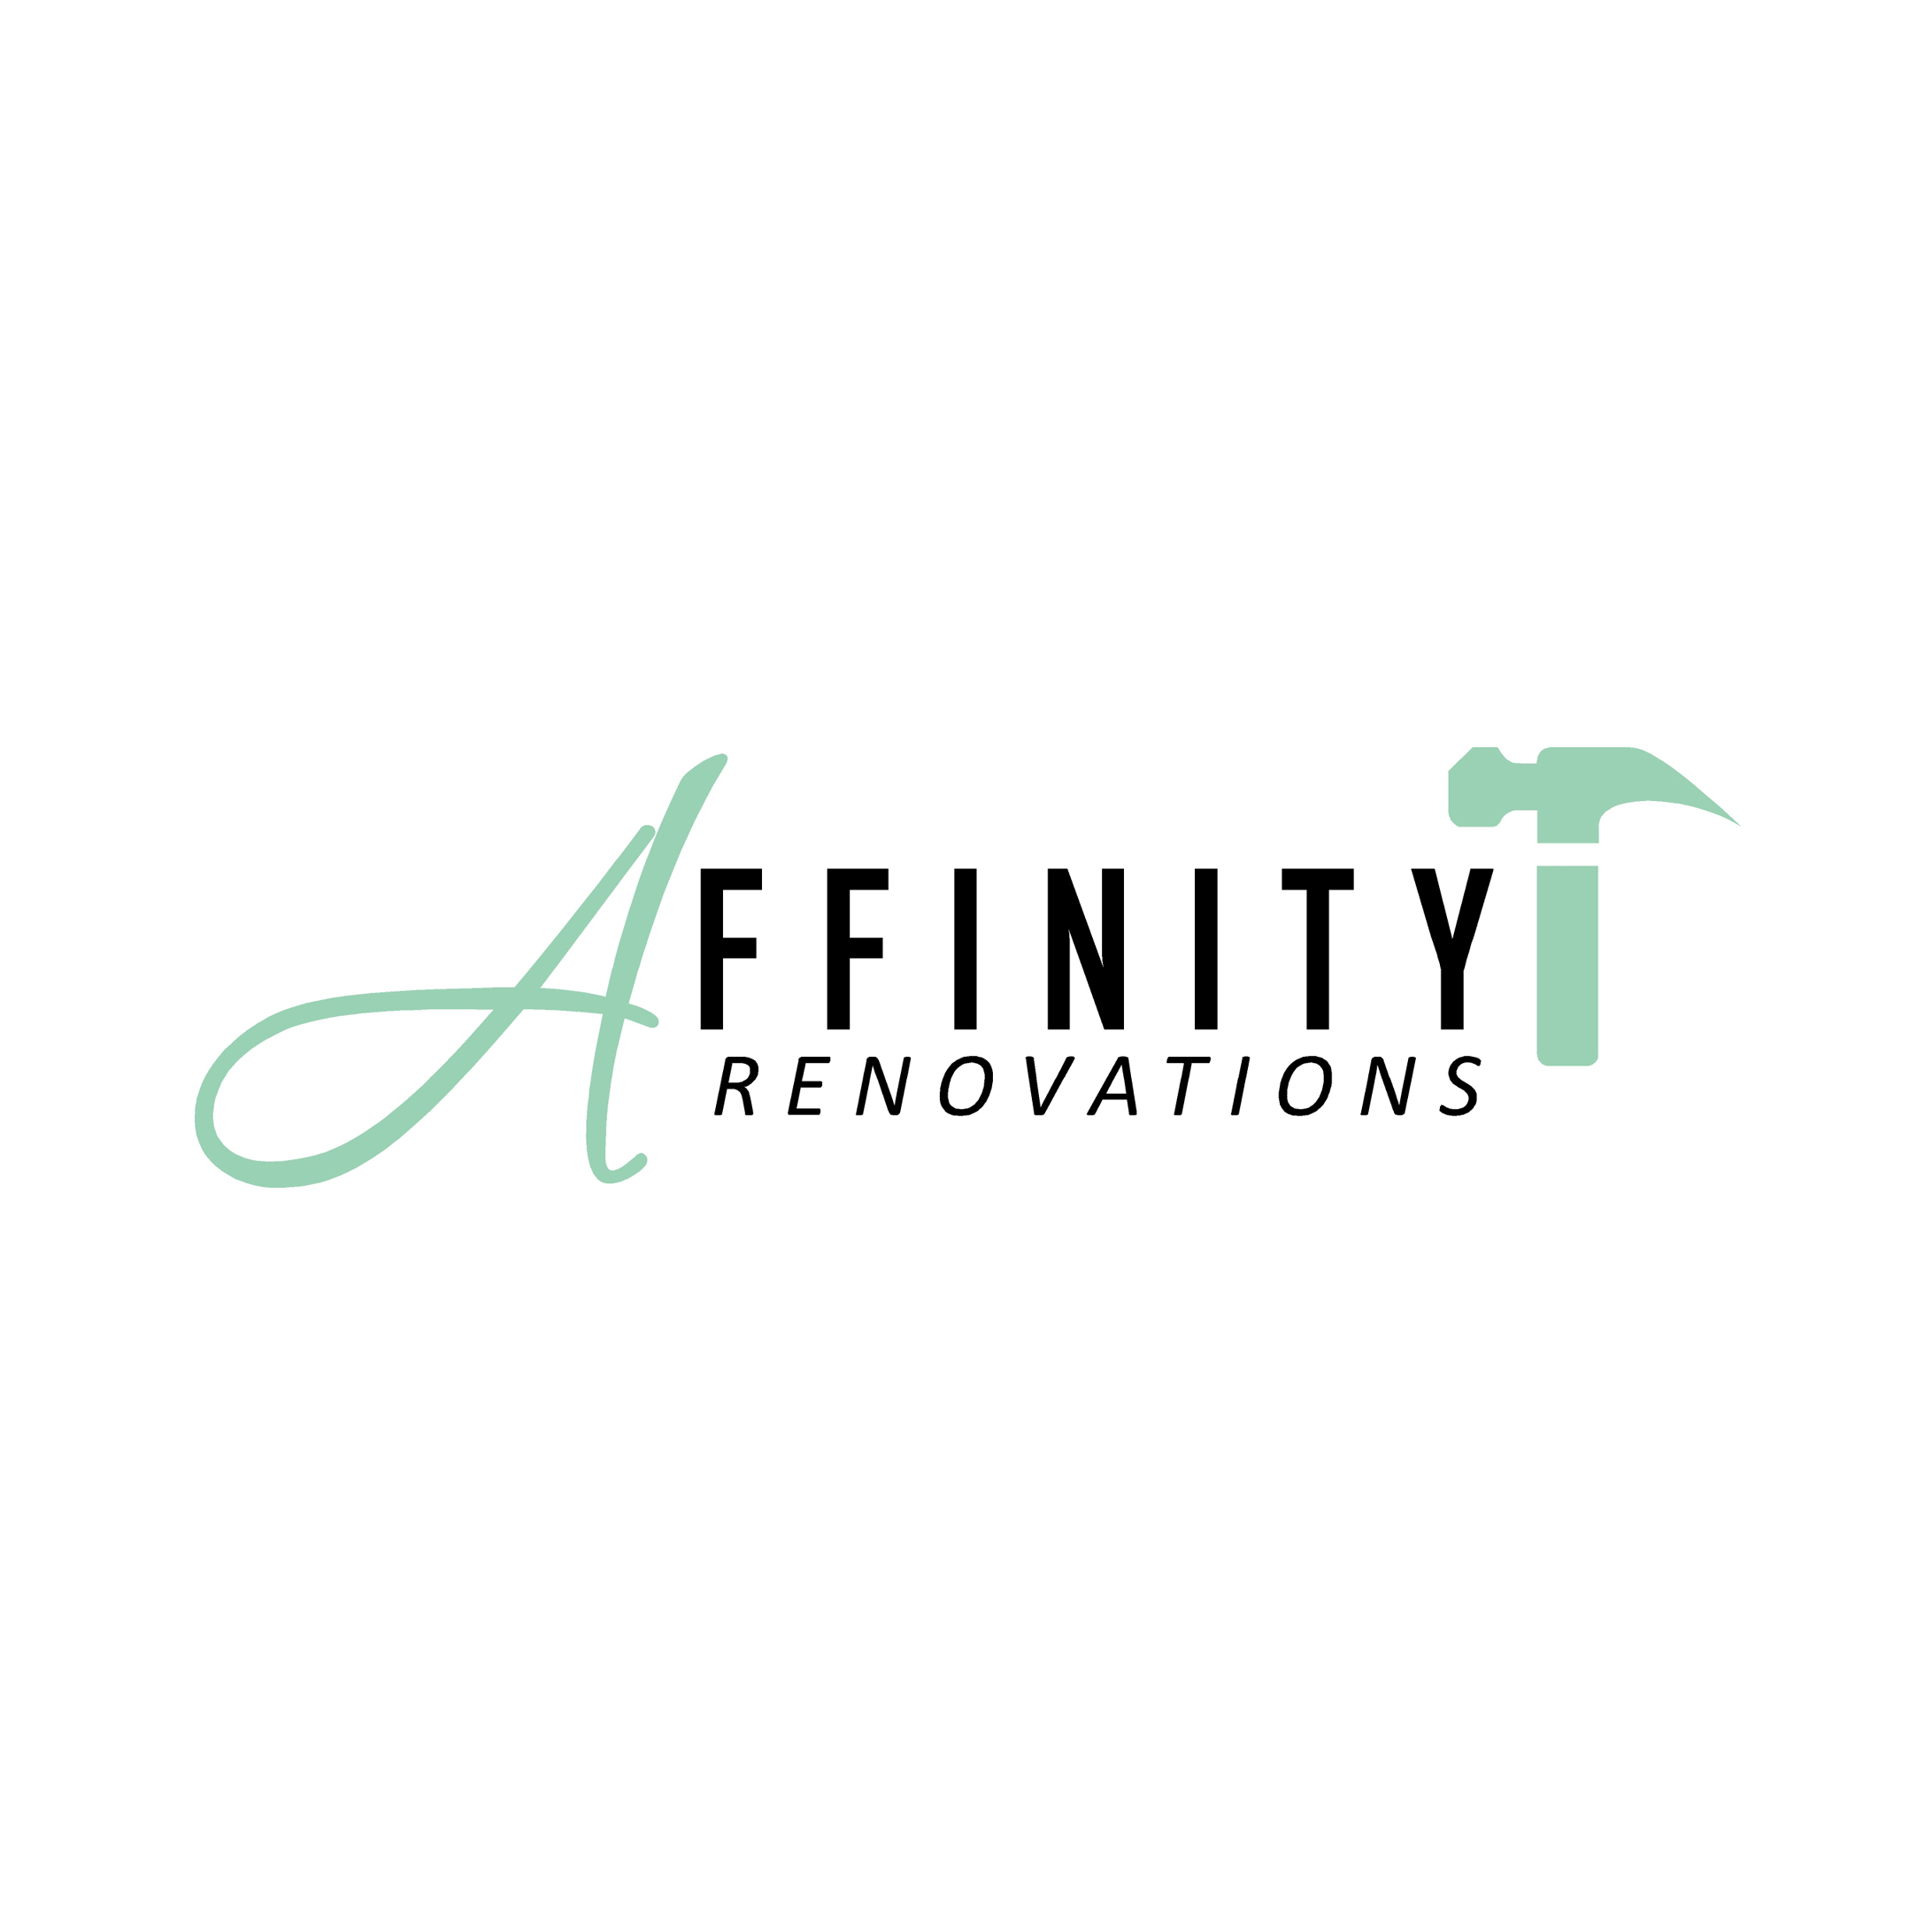 Affinity Renovations - The Home Improvement Group's logo